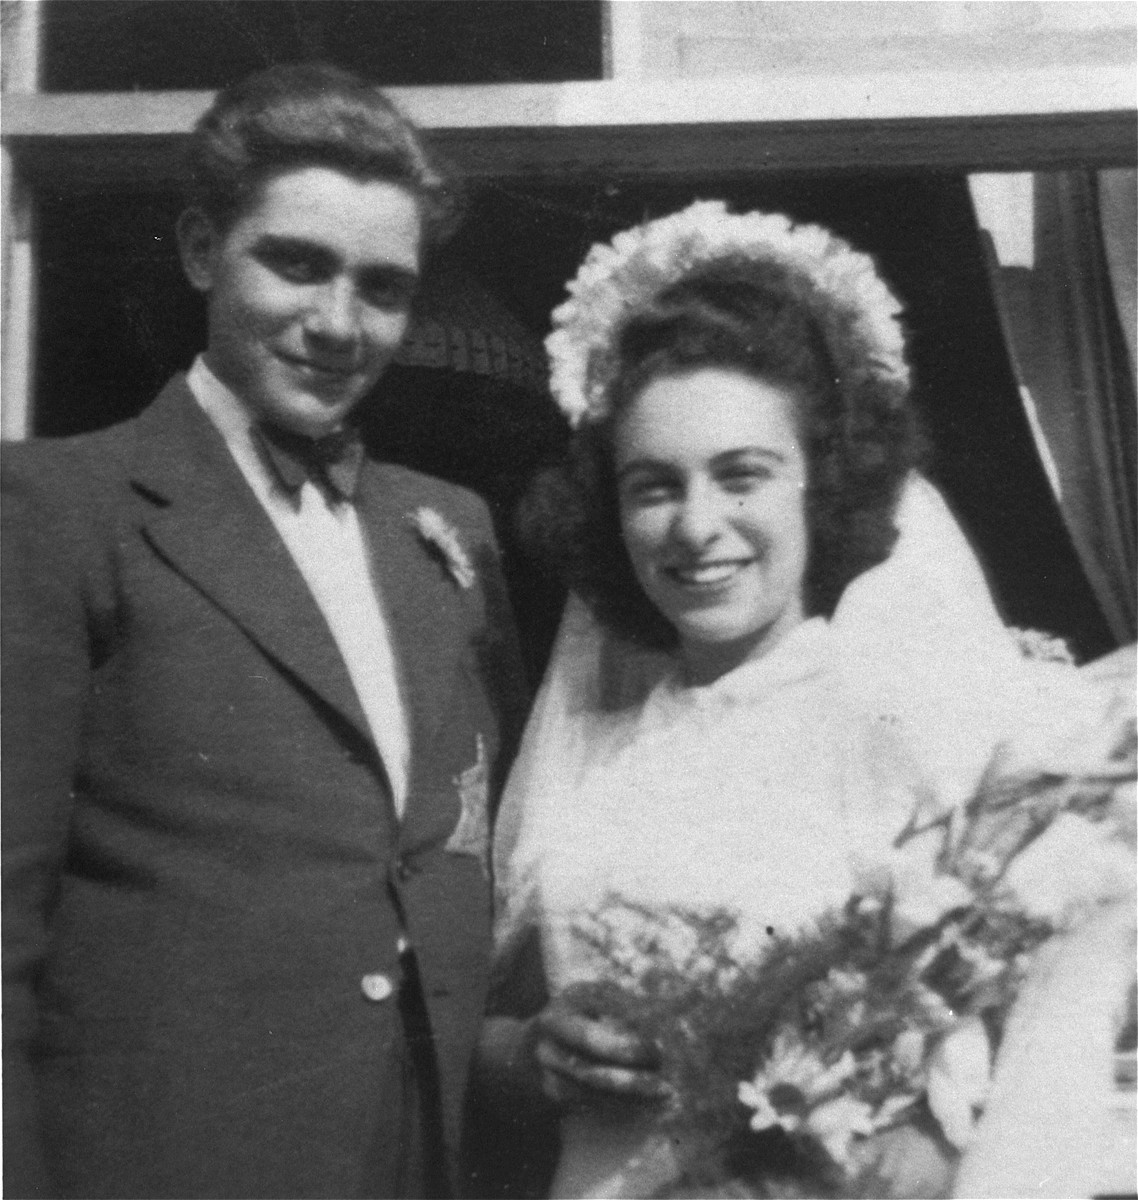 Portrait of a Jewish bride and groom at their wedding in the Westerbork transit camp.

Pictured are Peter and Sonja Margules.